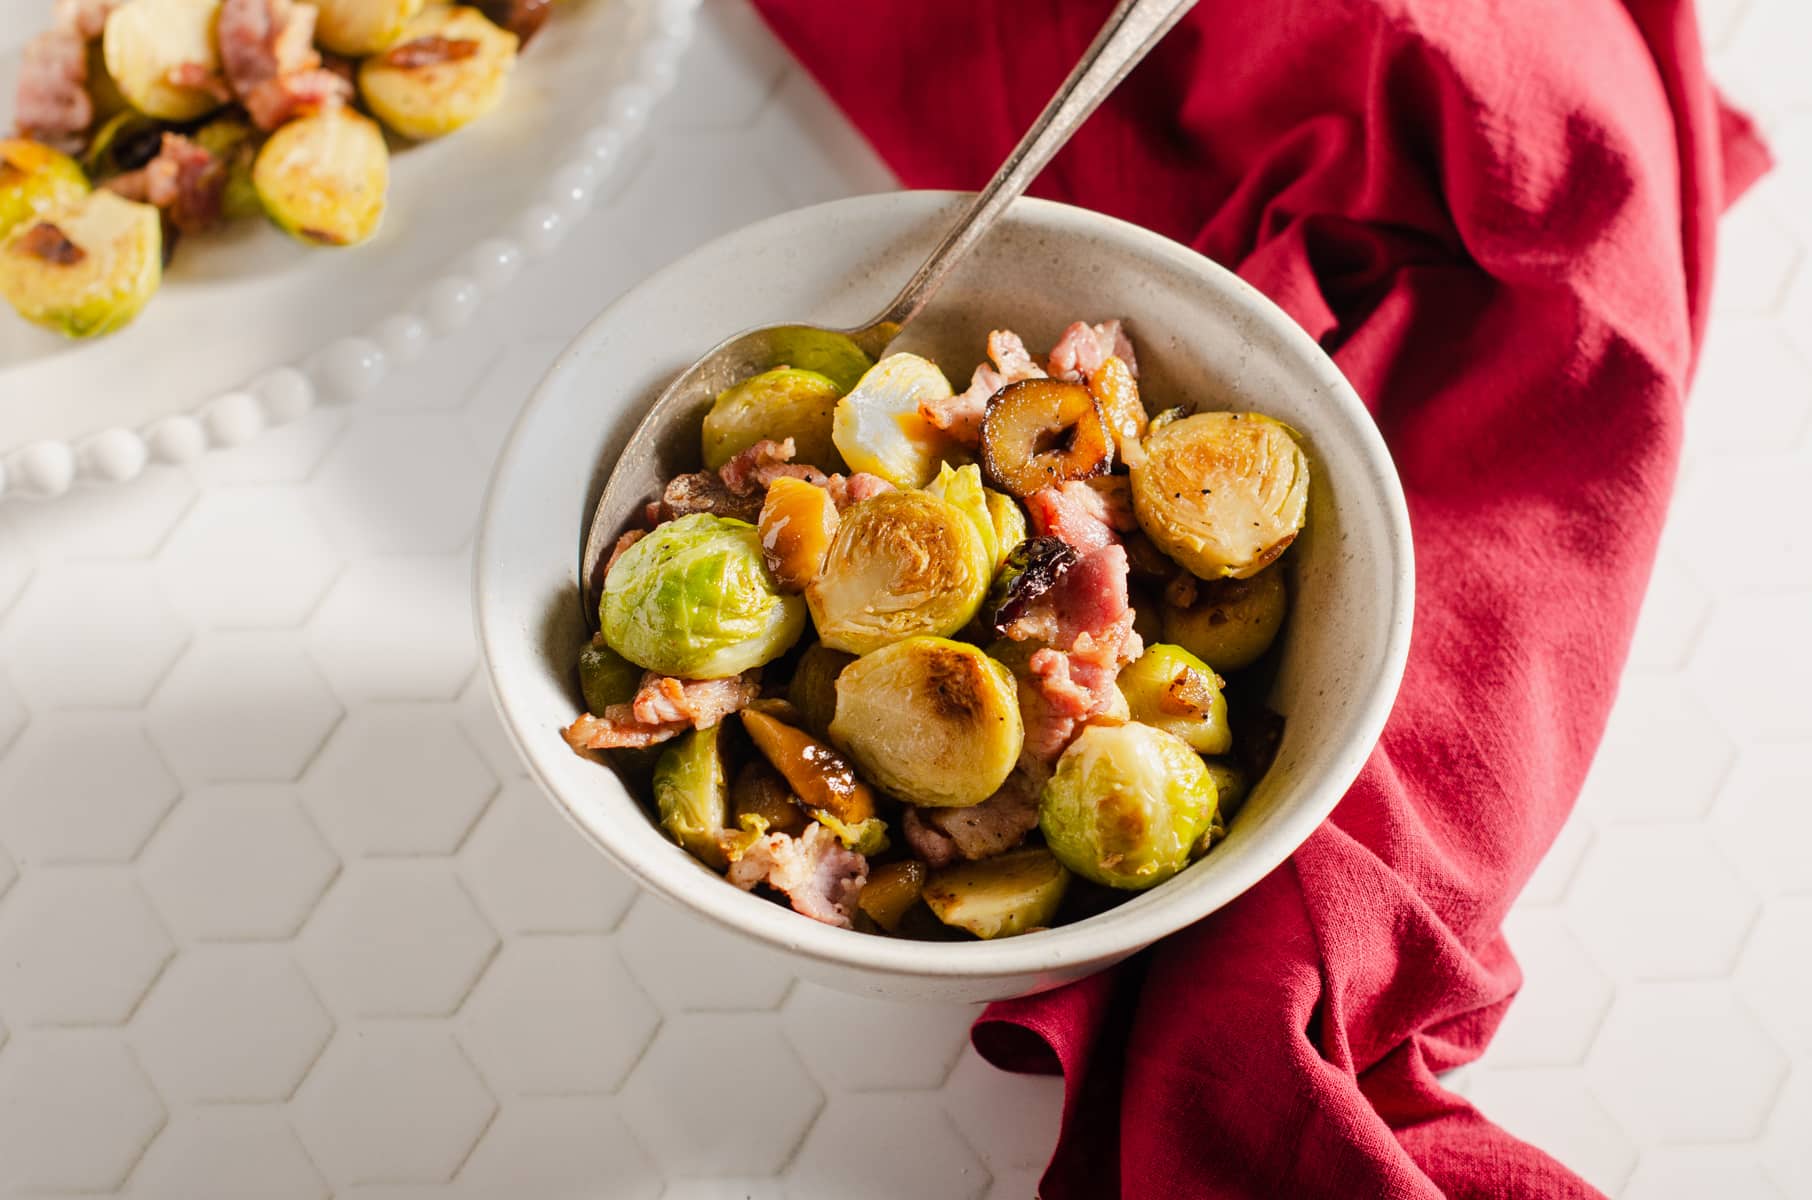 A bowl of brussel sprouts cooked with bacon and chestnuts on a white tiled surface and red Christmas linen.